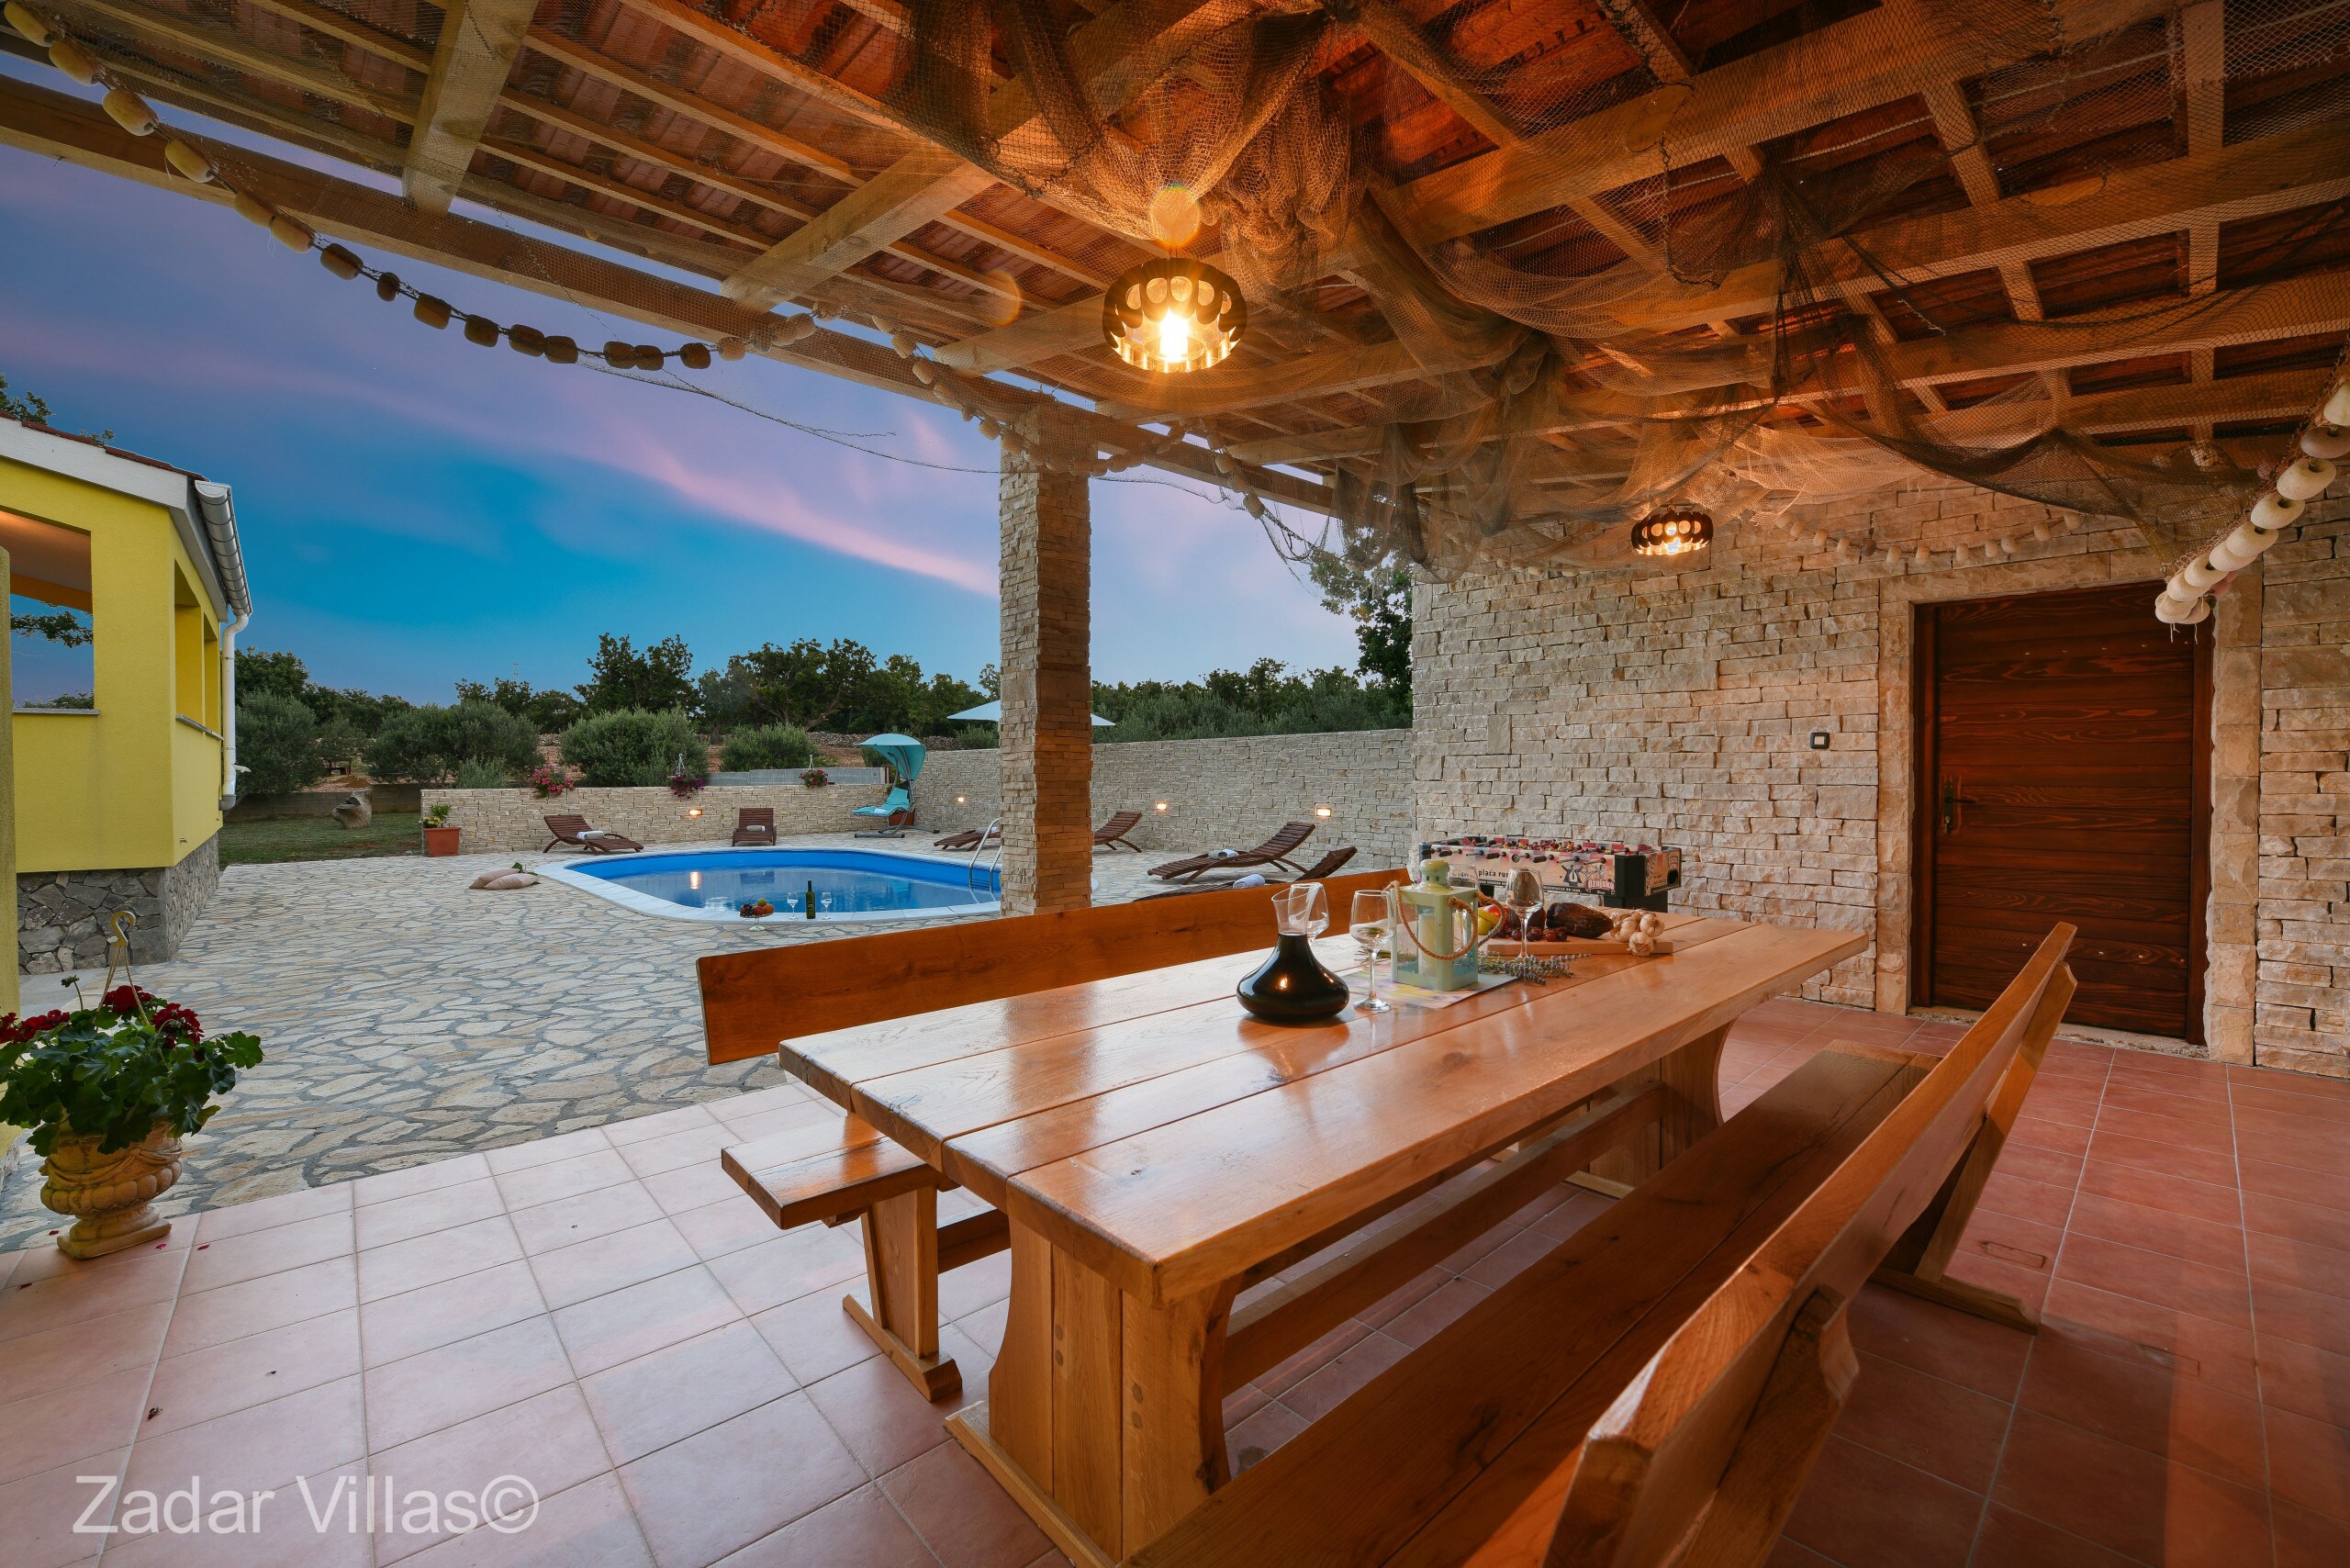 Property Image 2 - Dazzling Stone Villa with Pool Table near the Sea